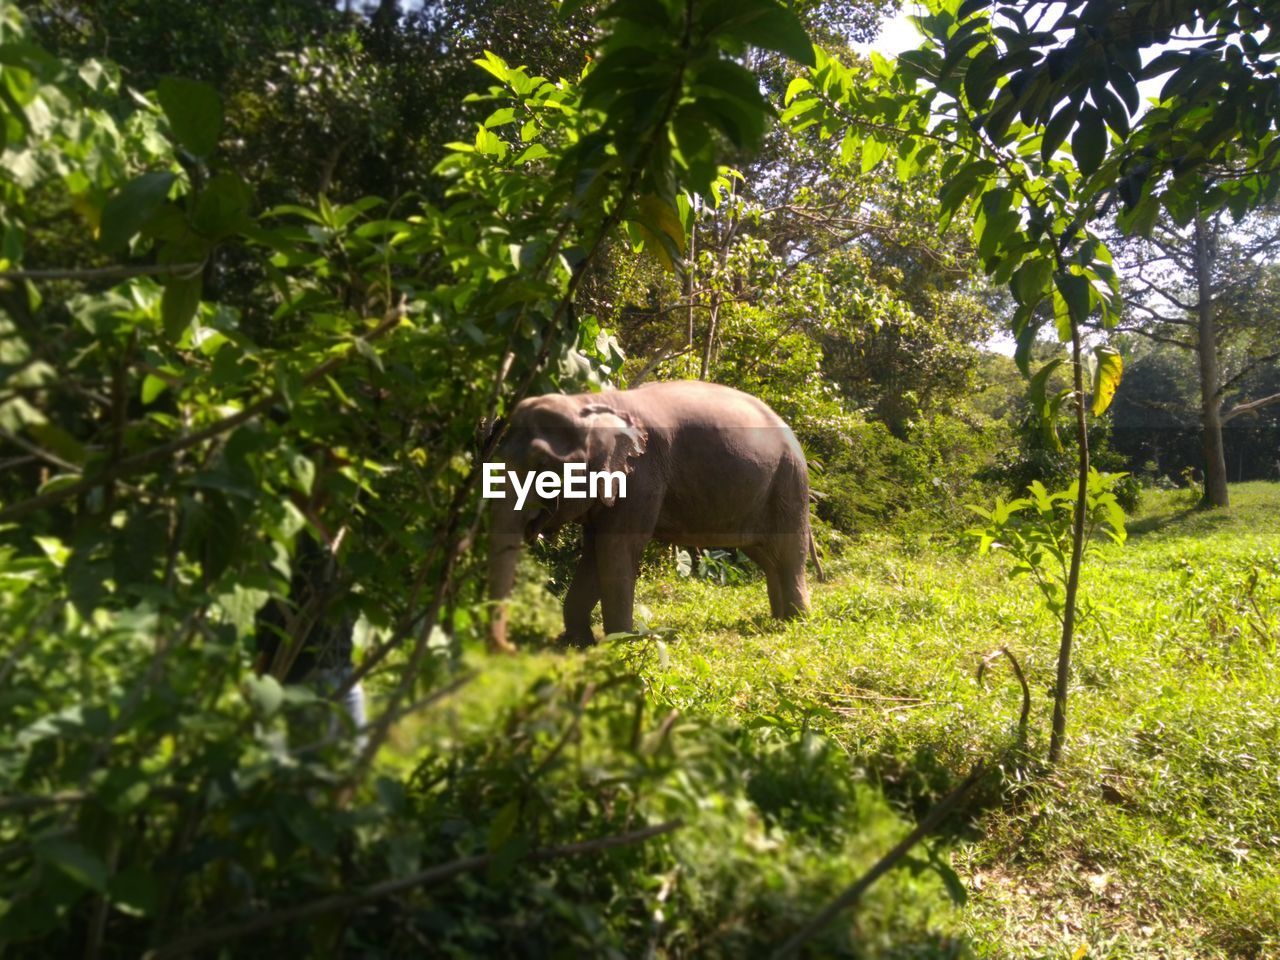 Side view of elephant standing by plants and trees in forest